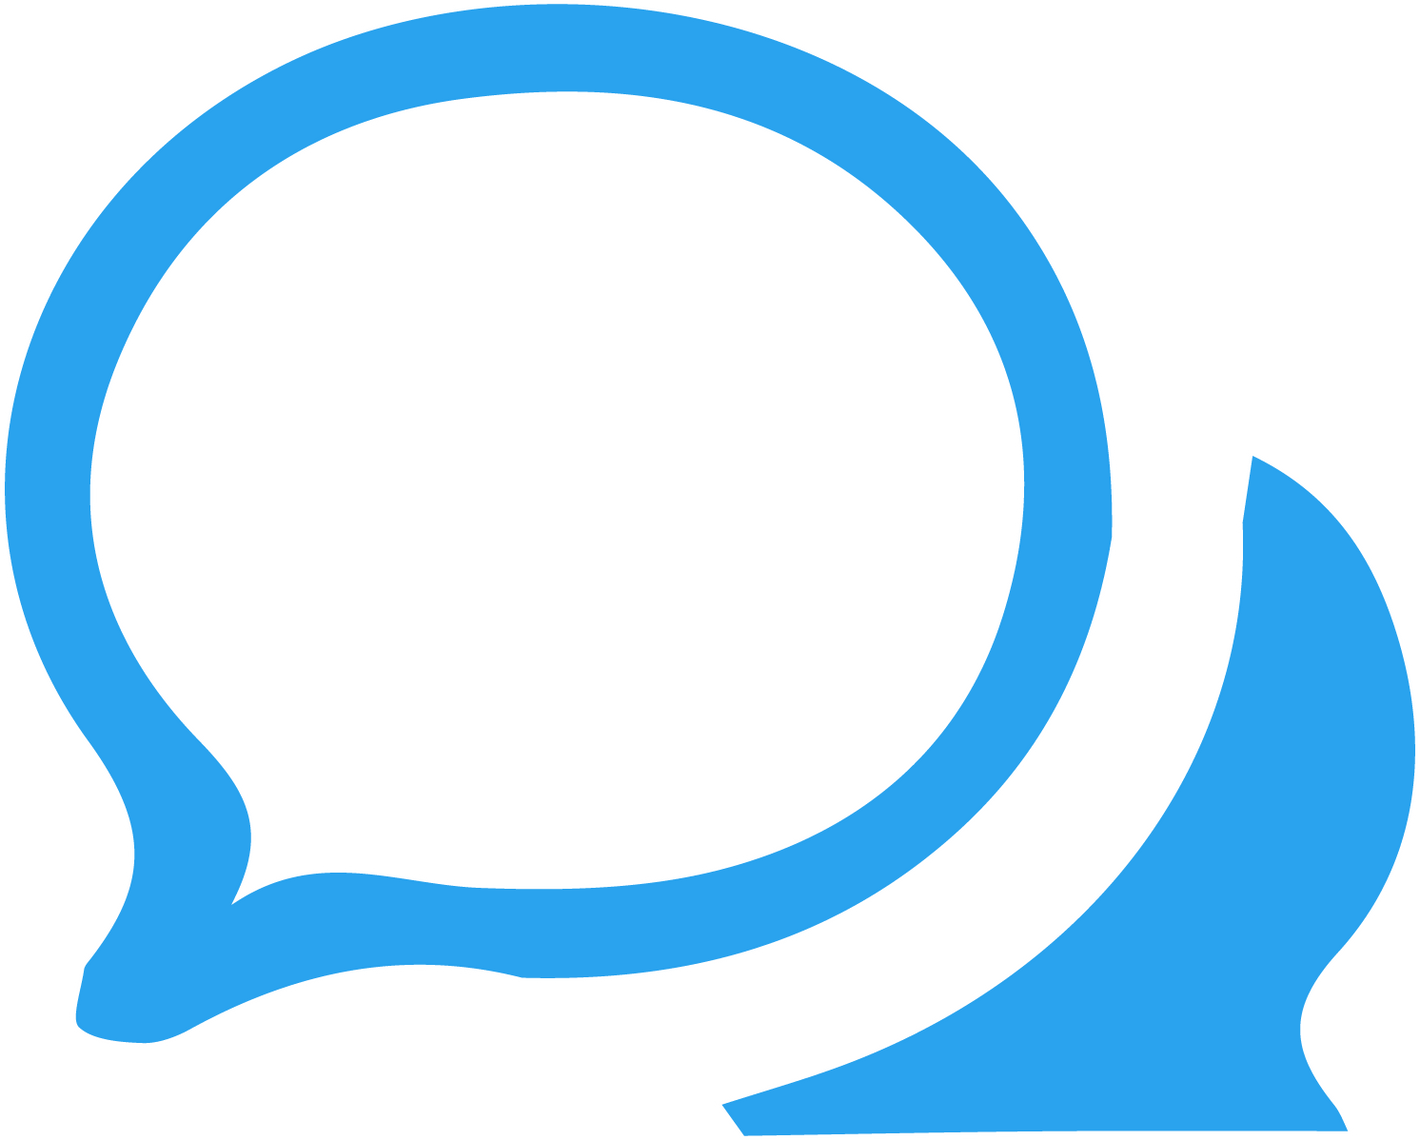 Blue illustration of a text bubble.